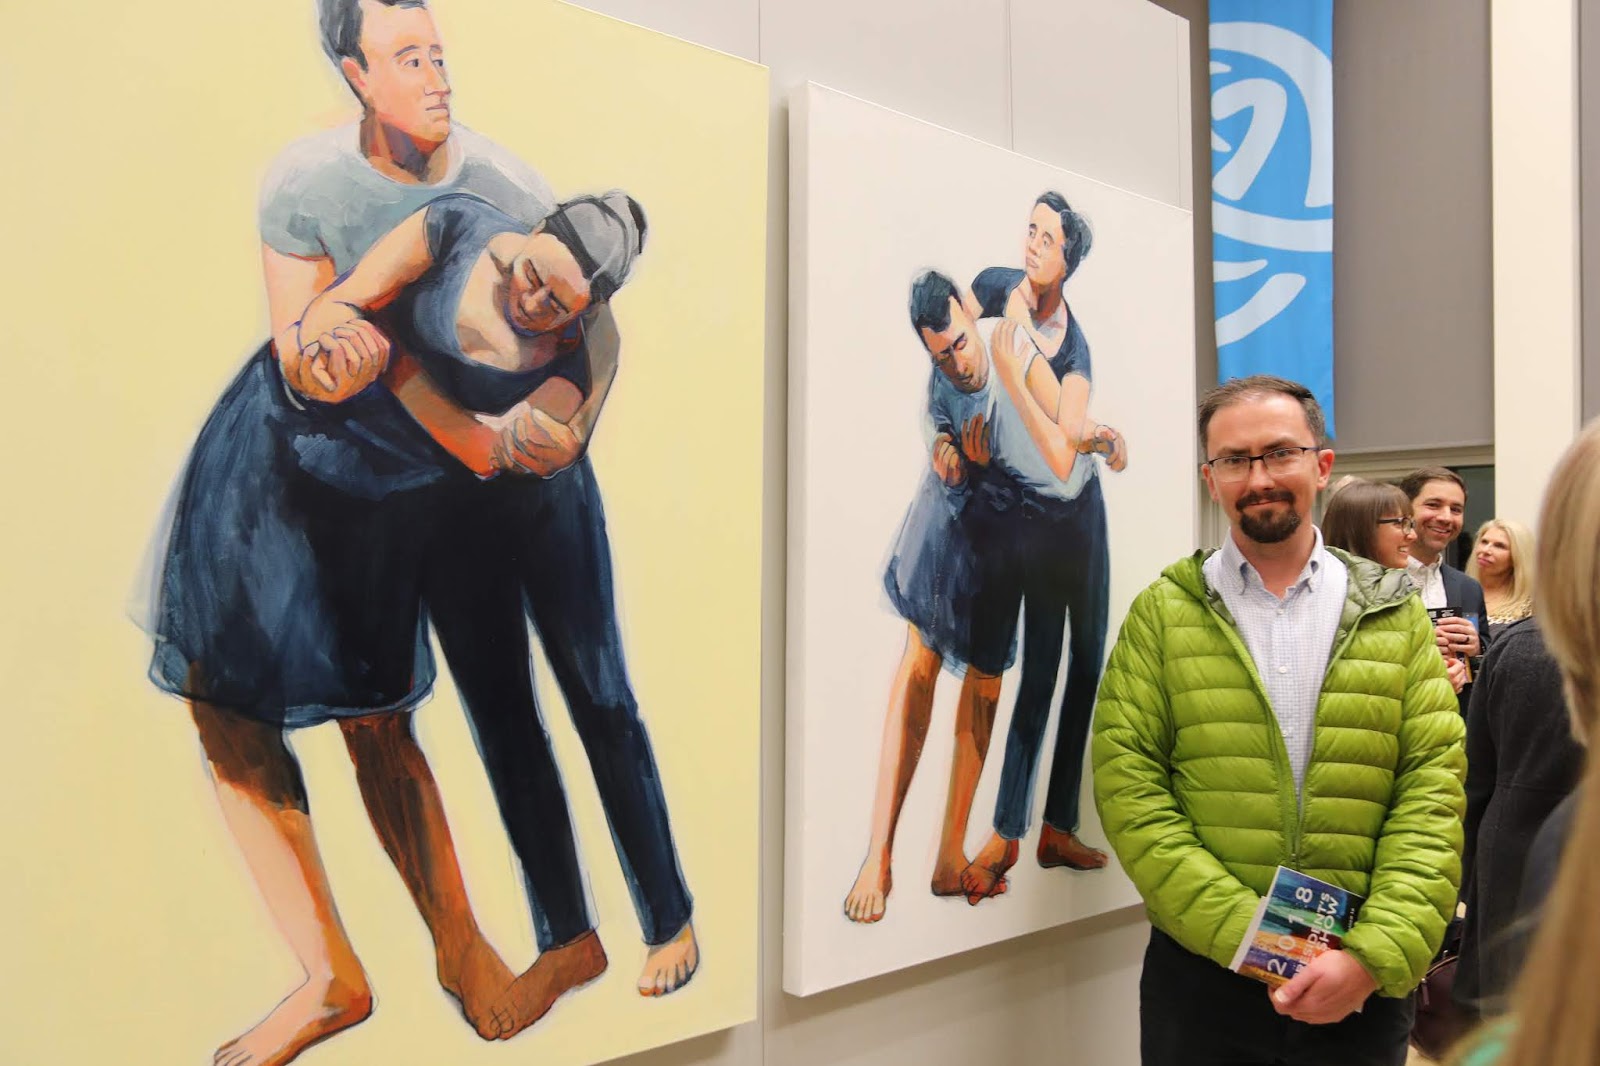 Works from Local Artists Now on Display at SLCC President